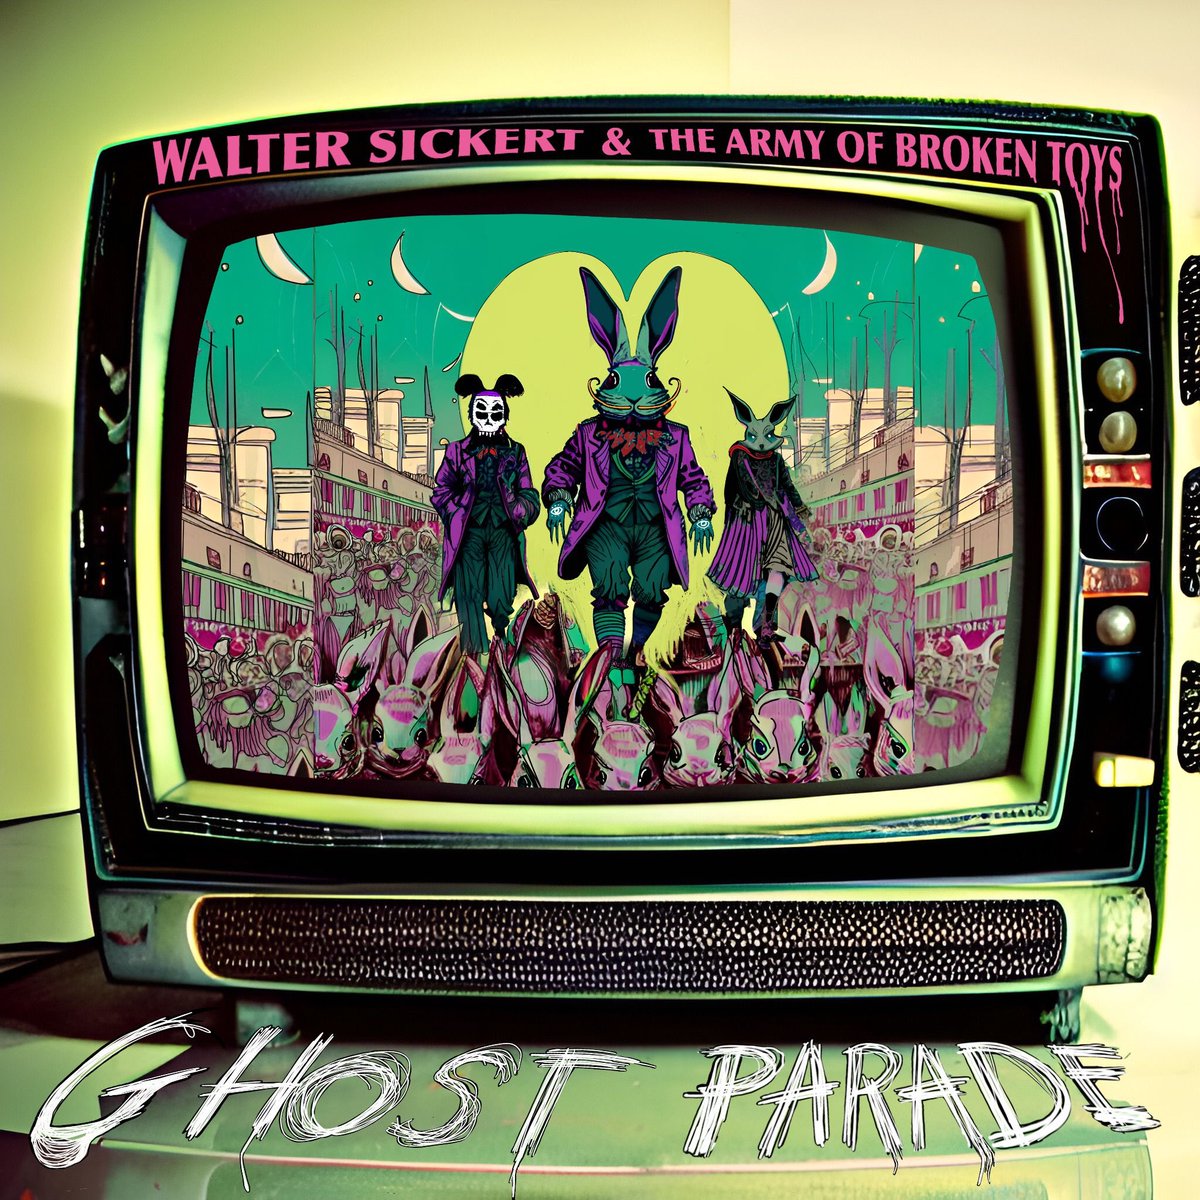 Join the GHOST PARADE @RPMChallenge #RPM2023 By Walter Sickert & the Army of Broken Toys Our yearly / improvised / 1st take / sonic experiment armyoftoys.bandcamp.com/album/ghost-pa…